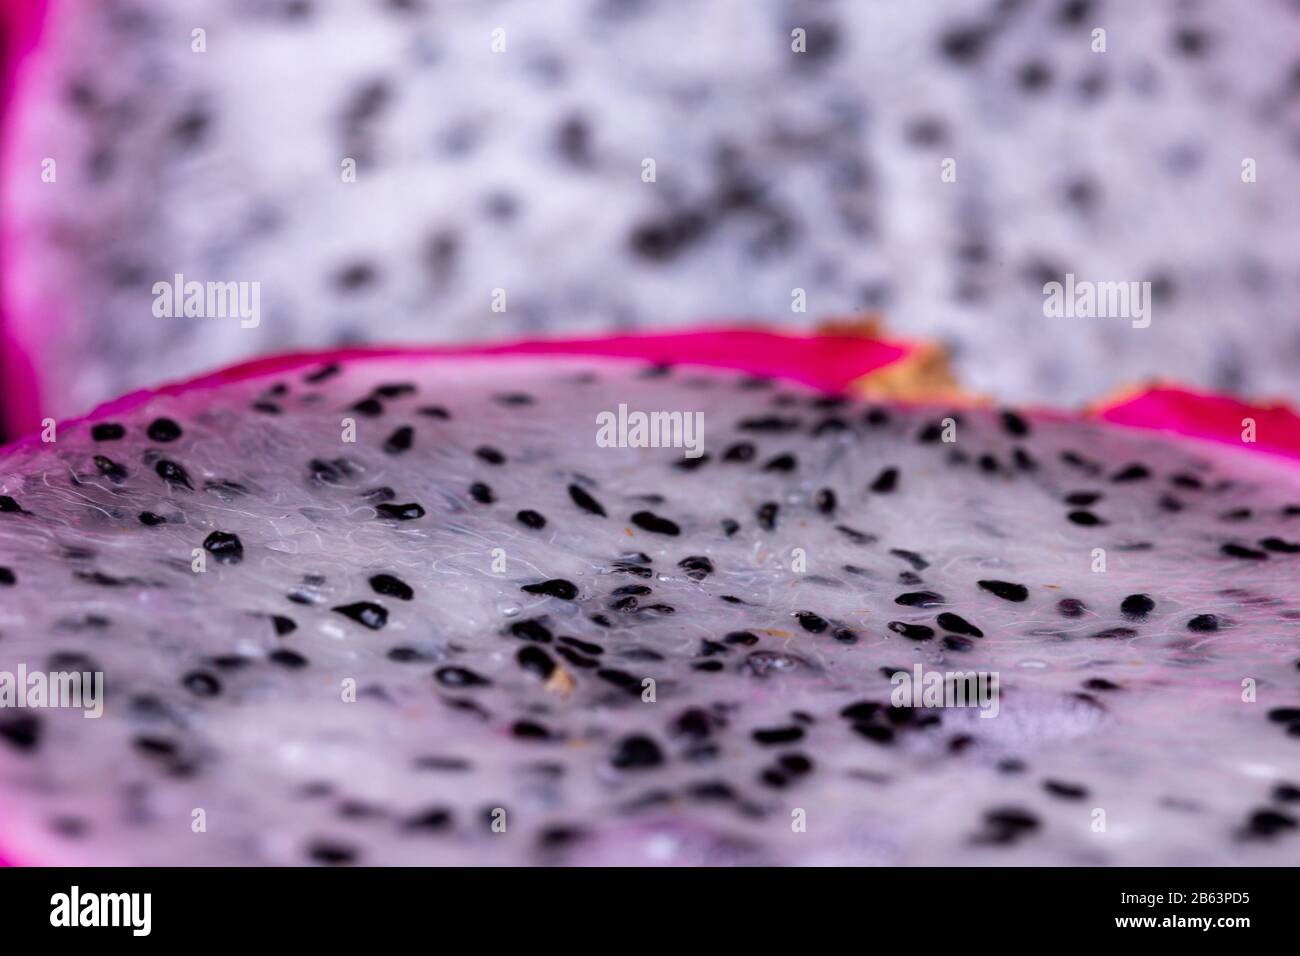 Close up macro view of white pulp and black seeds  of white-fleshed Pitaya or Dragon fruit with other half out of focus blurred in the background Stock Photo